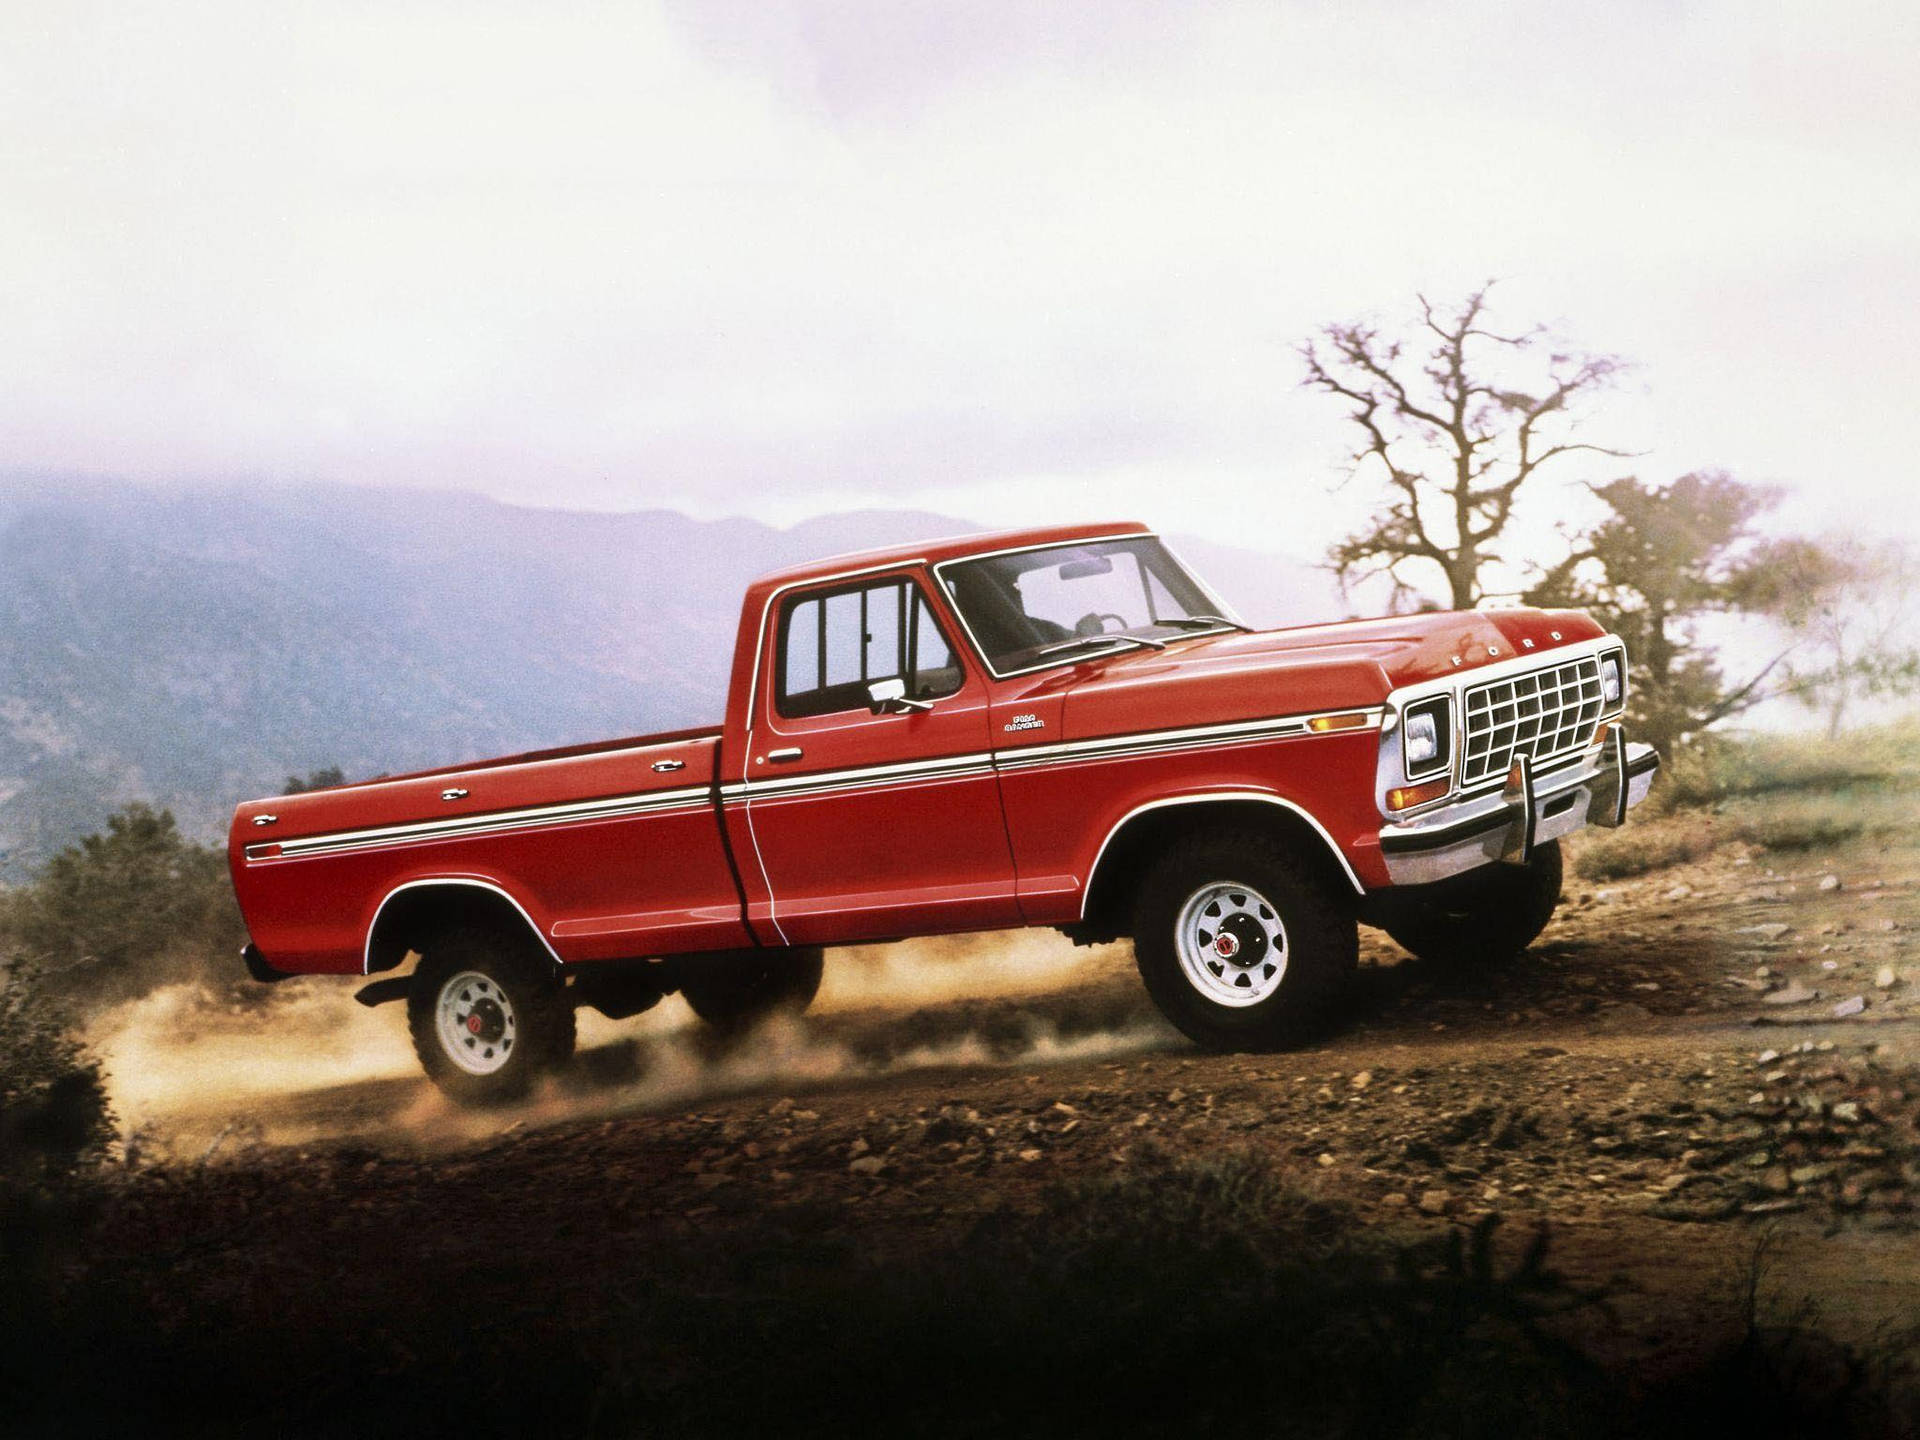 Vintage Charm: Witness The Timeless Beauty Of A Red Old Ford Truck